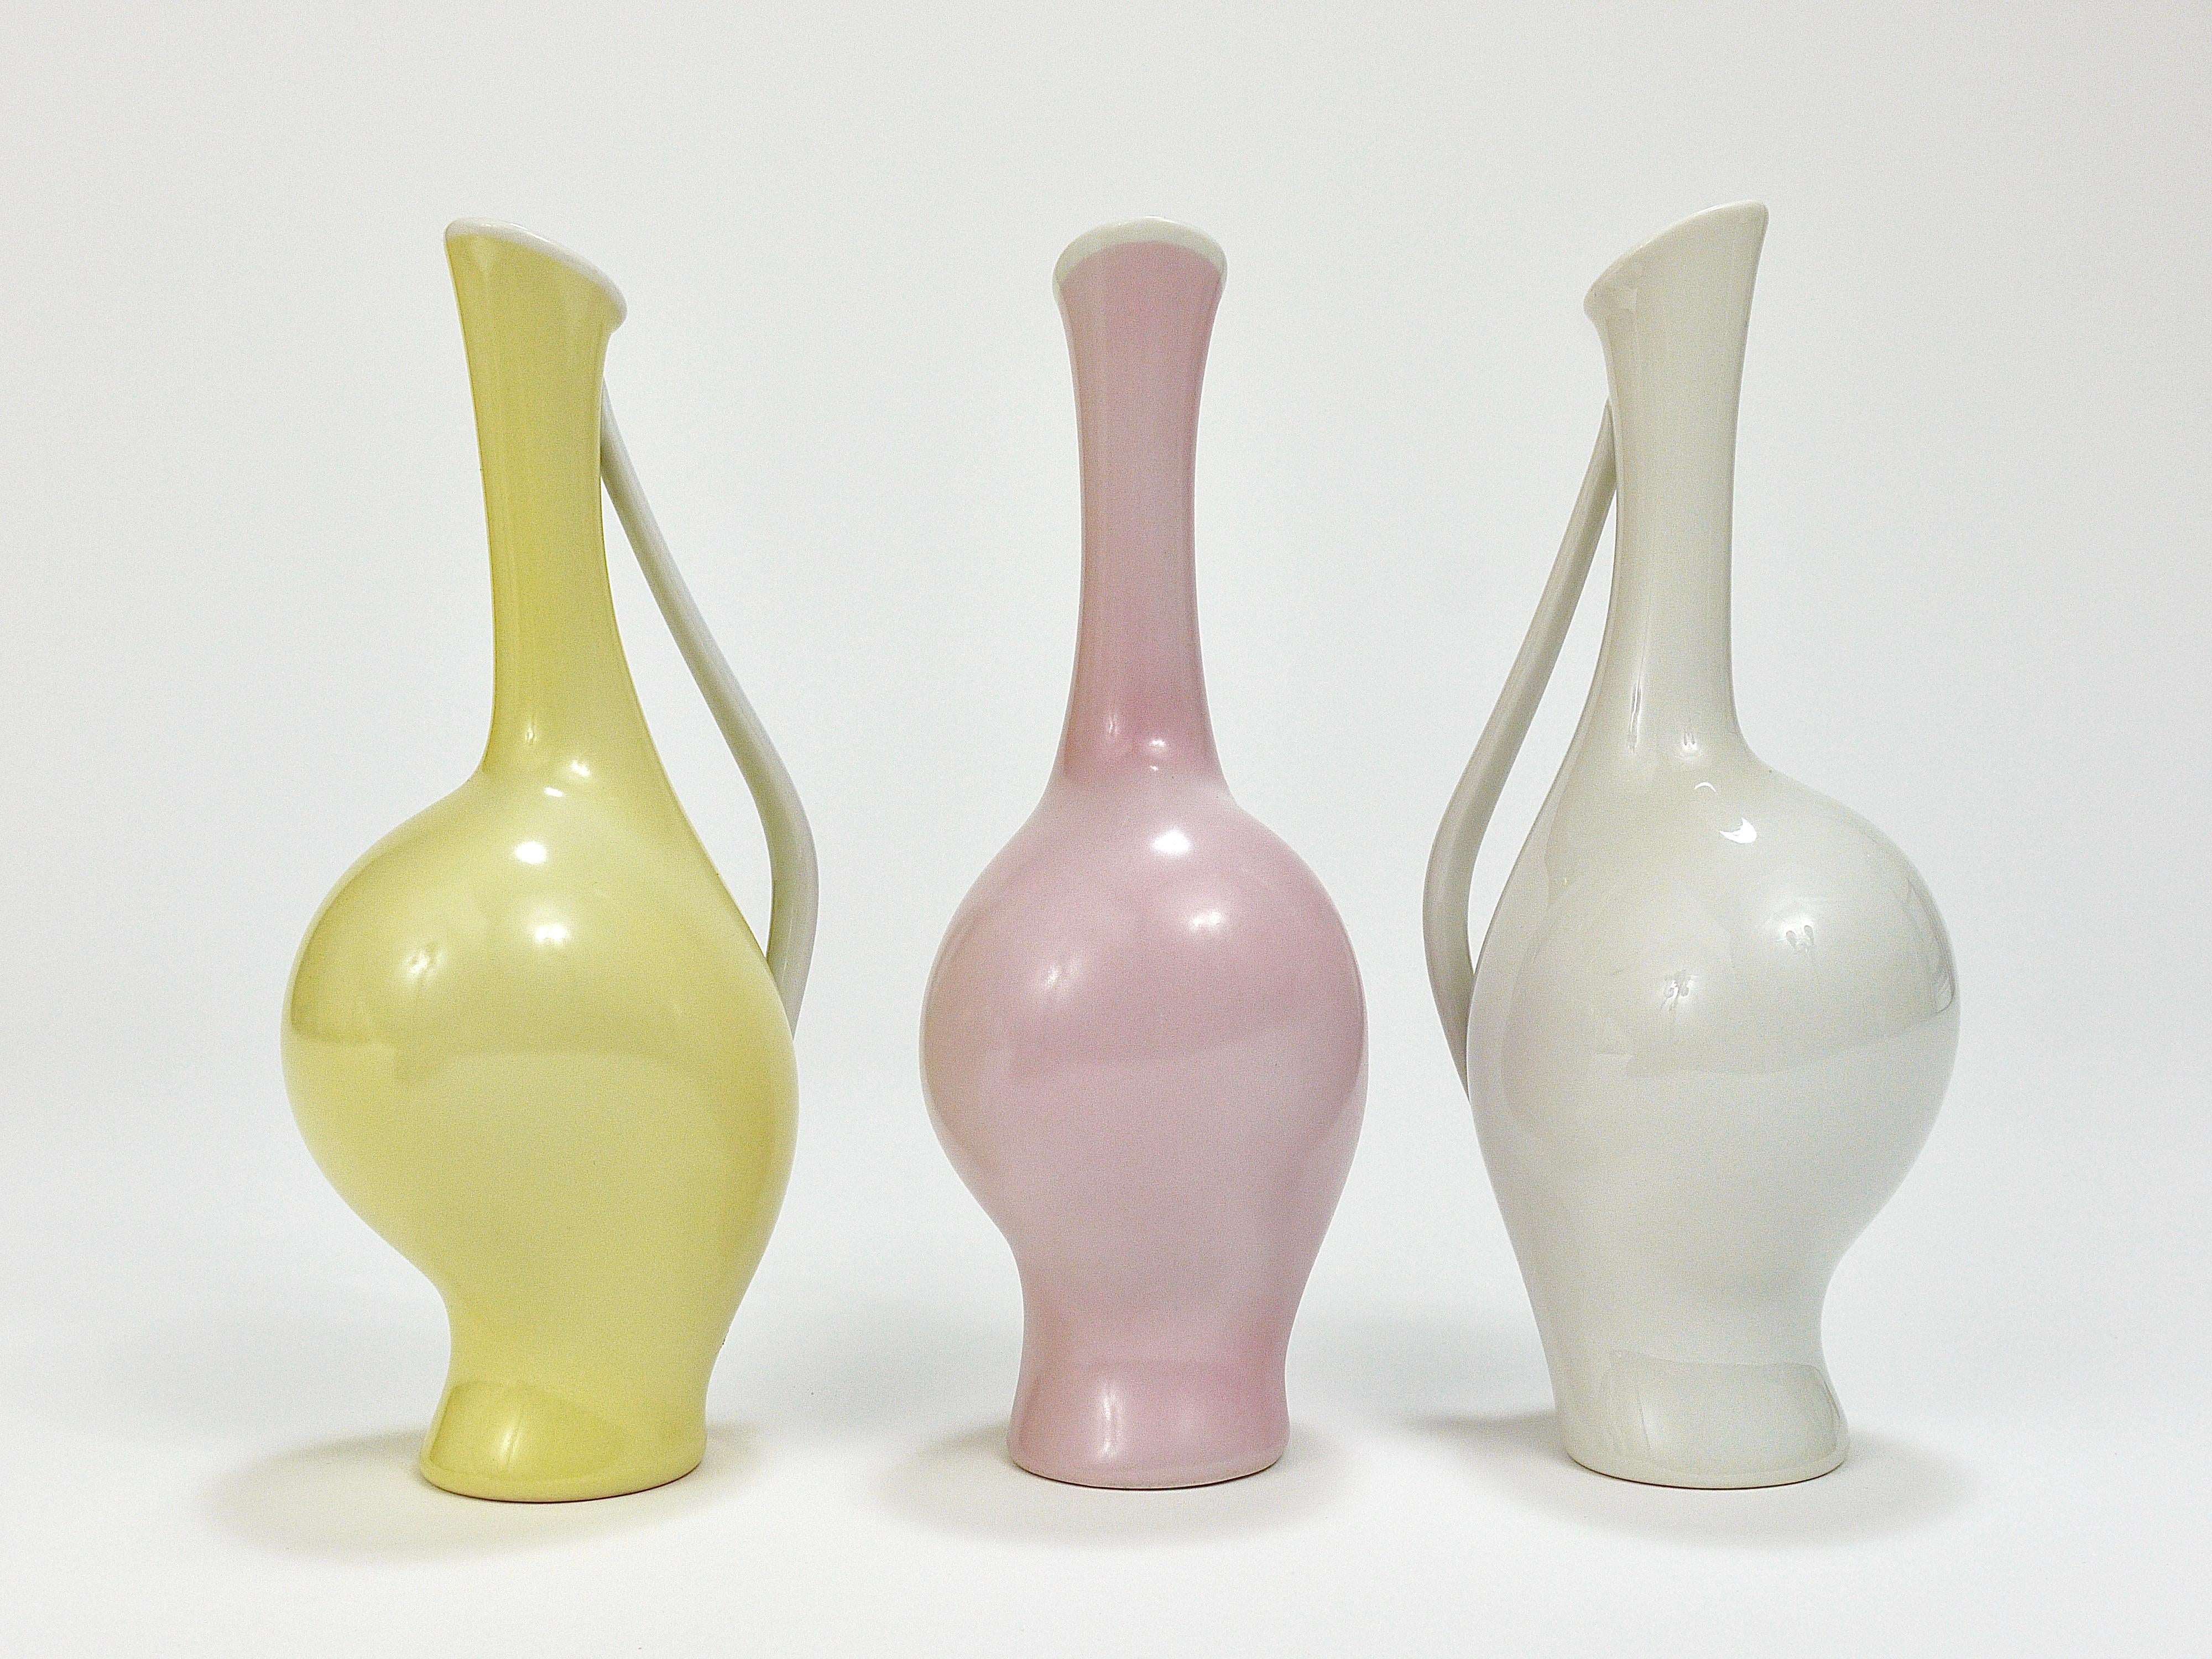 Up to three lovely mid-century vases from the 1950s. Designed by Fritz Heidenreich and executed by Rosenthal Germany, Kunstabteilung Selb.
Made of porcelain / china, available in three different colors: white, rosé / pink and pastel yellow. This